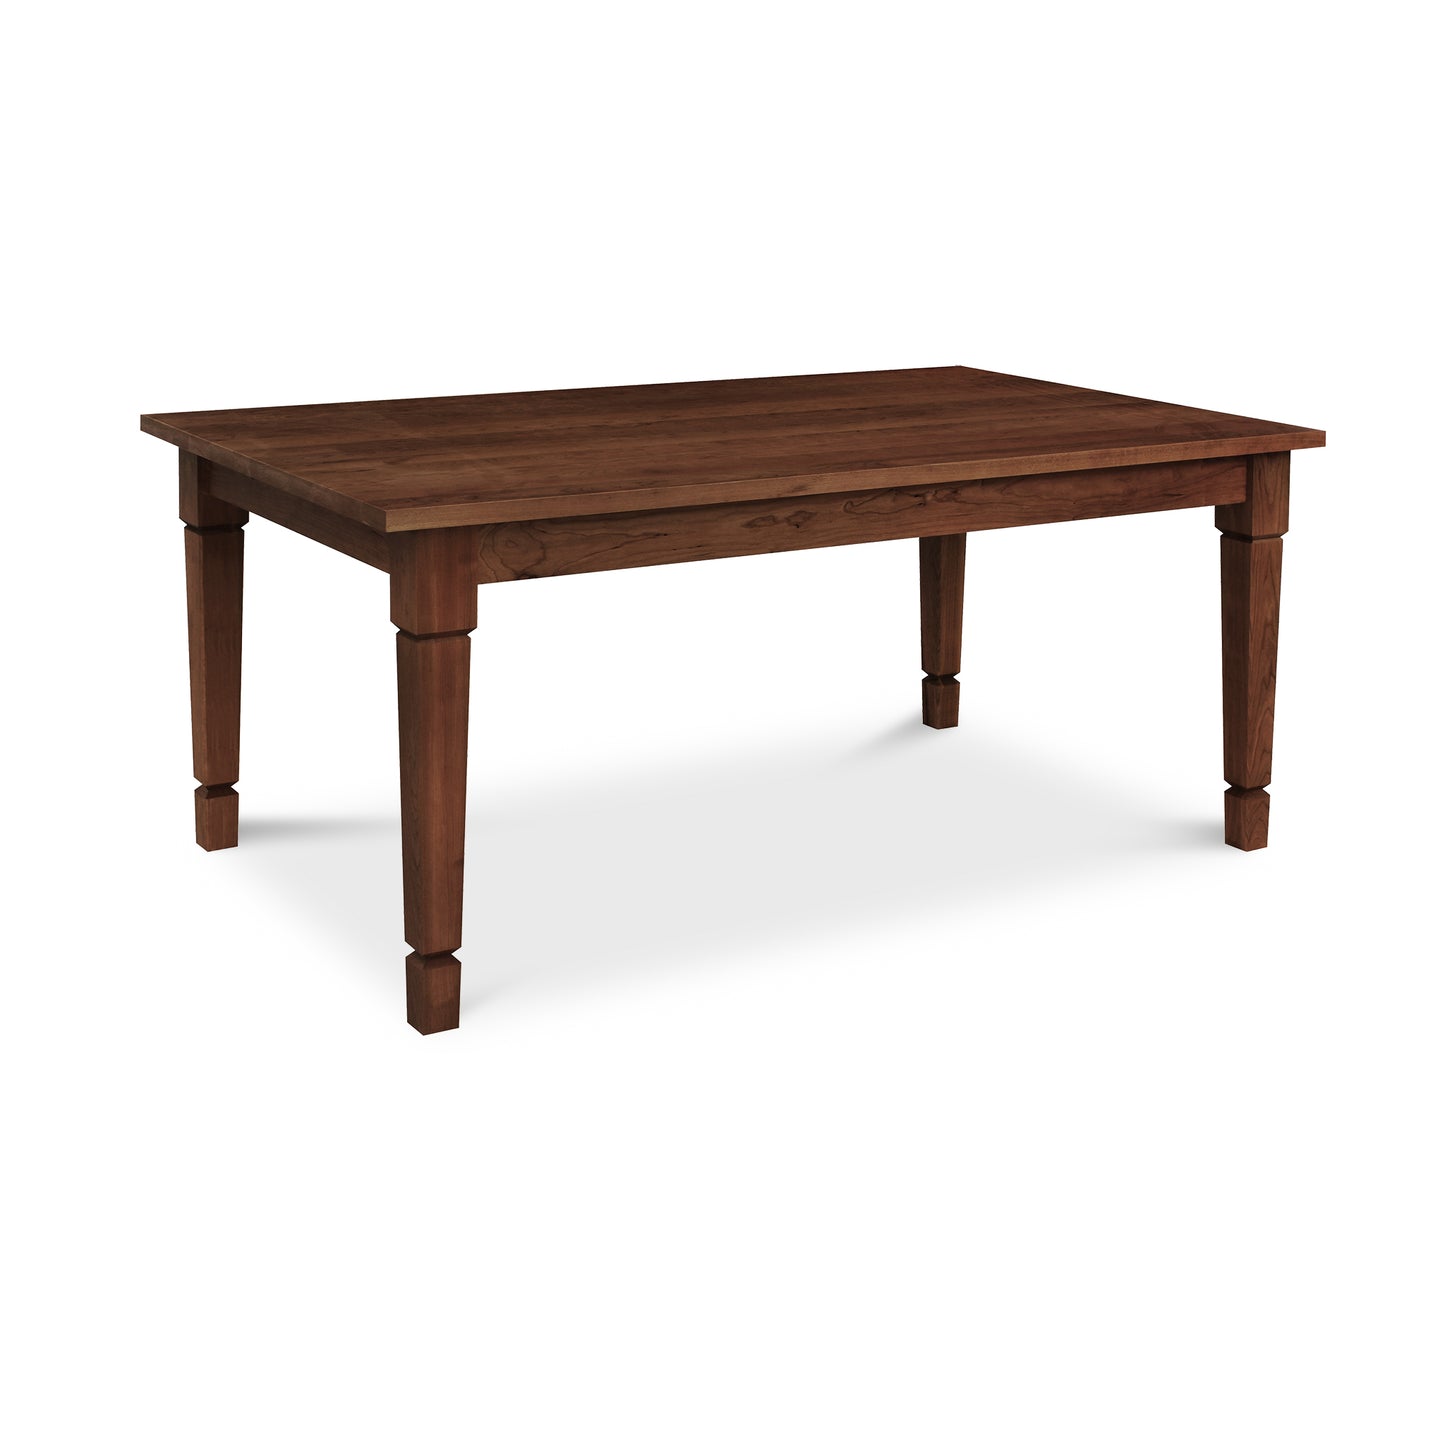 A Lyndon Furniture American Craftsman Solid Top Dining Table, expertly crafted from fine hardwoods and made-to-order with sturdy wooden legs.